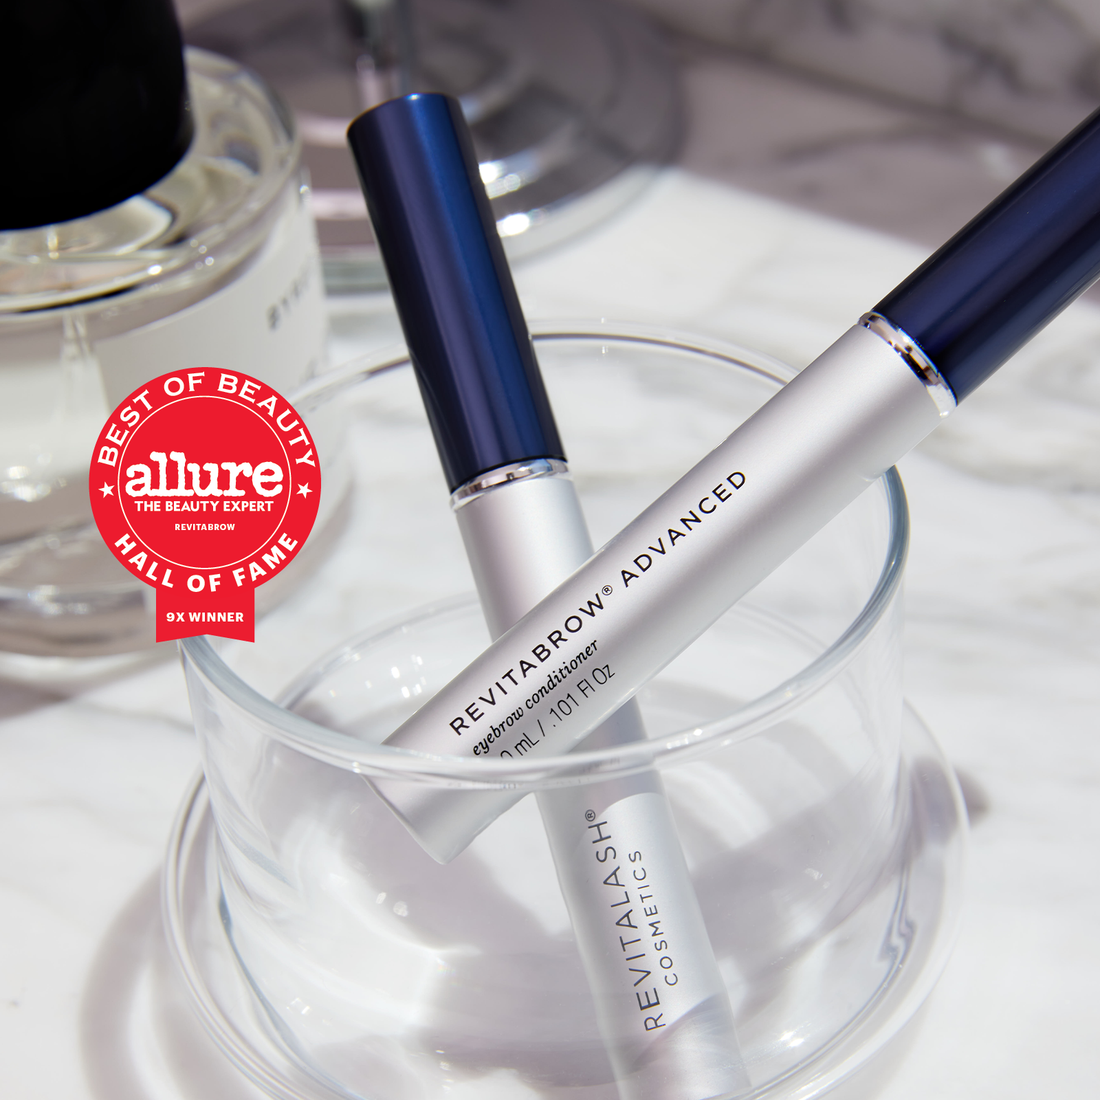 Image of 2 RevitaBrow Advanced tubes in a clear beaker. Also displayed is an Allure award seal for Best of Beauty Hall of Fame 9x Winner